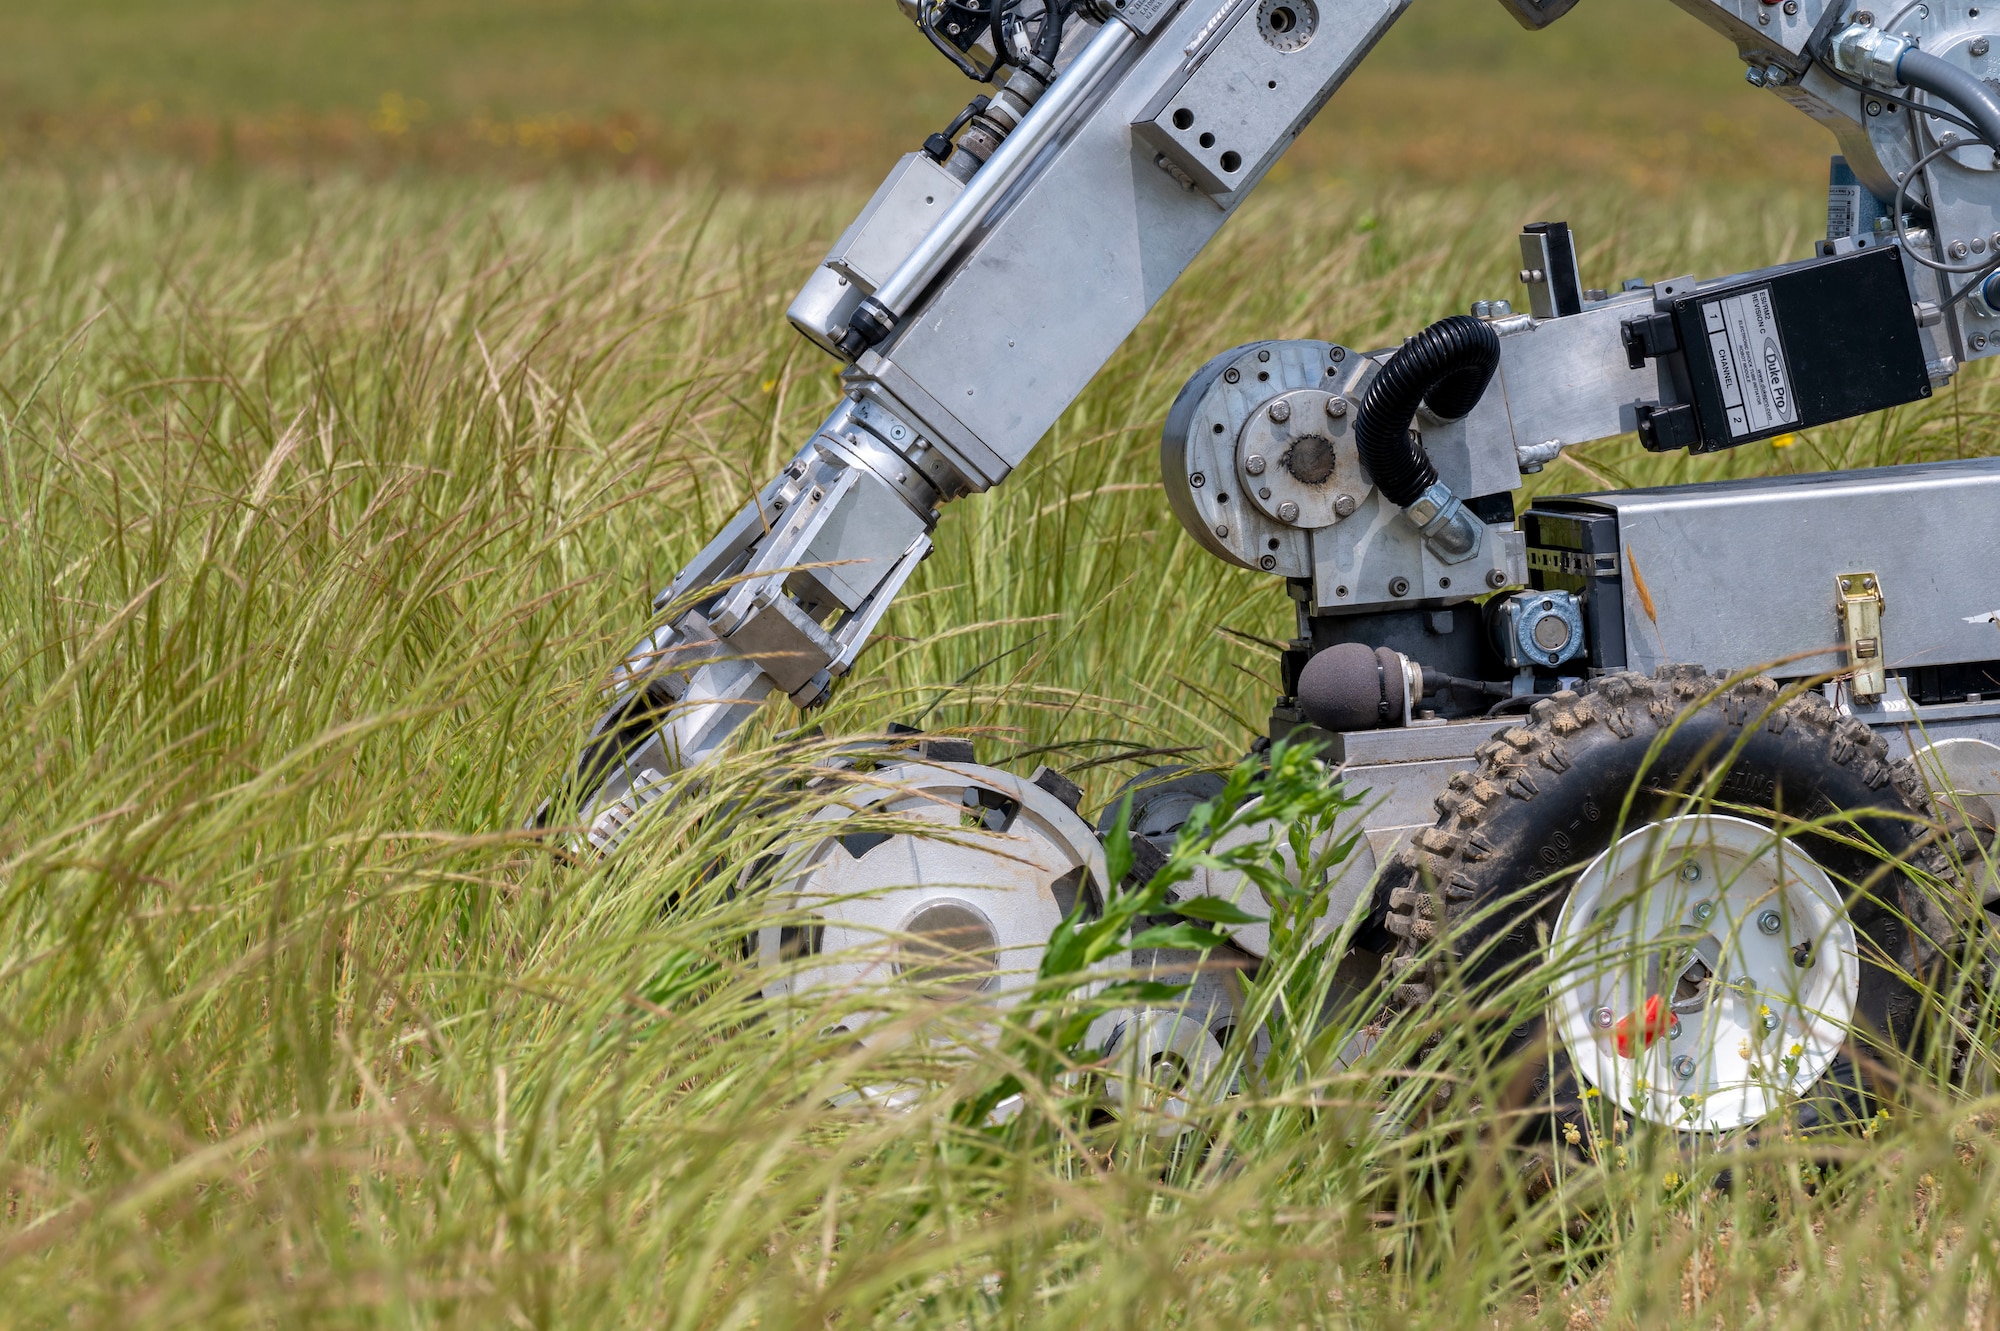 An F6A explosive ordnance disposal robot locates a simulated explosive during an exercise at Dover Air Force Base, Delaware, May 26, 2021. The exercise tested EOD personnel on the detection and diffusion of simulated improvised explosive devices. (U.S. Air Force photo by Airman 1st Class Cydney Lee)